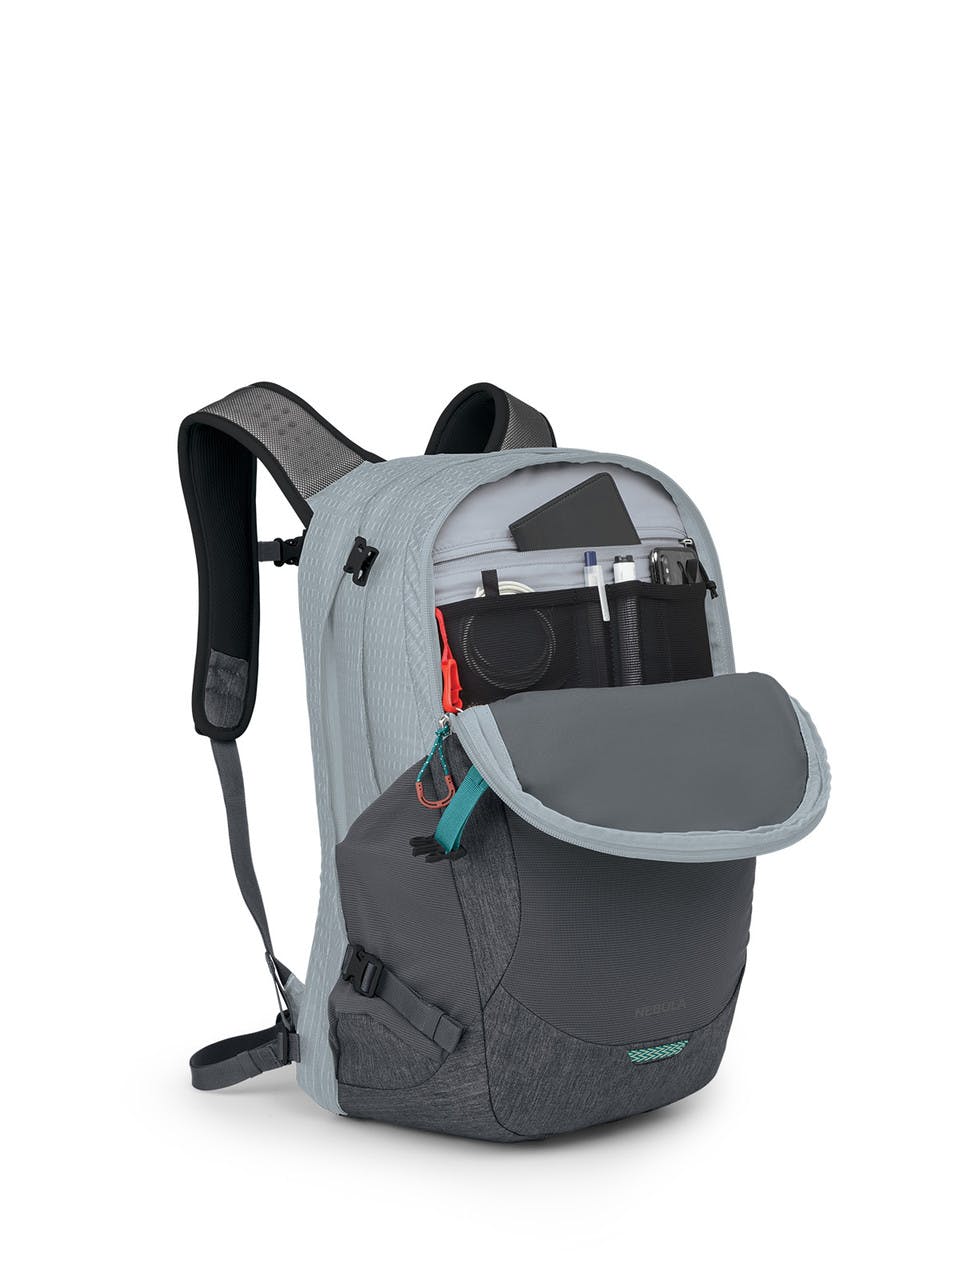 Nebula 32 Backpack Silver Lining/Tunnel Visi